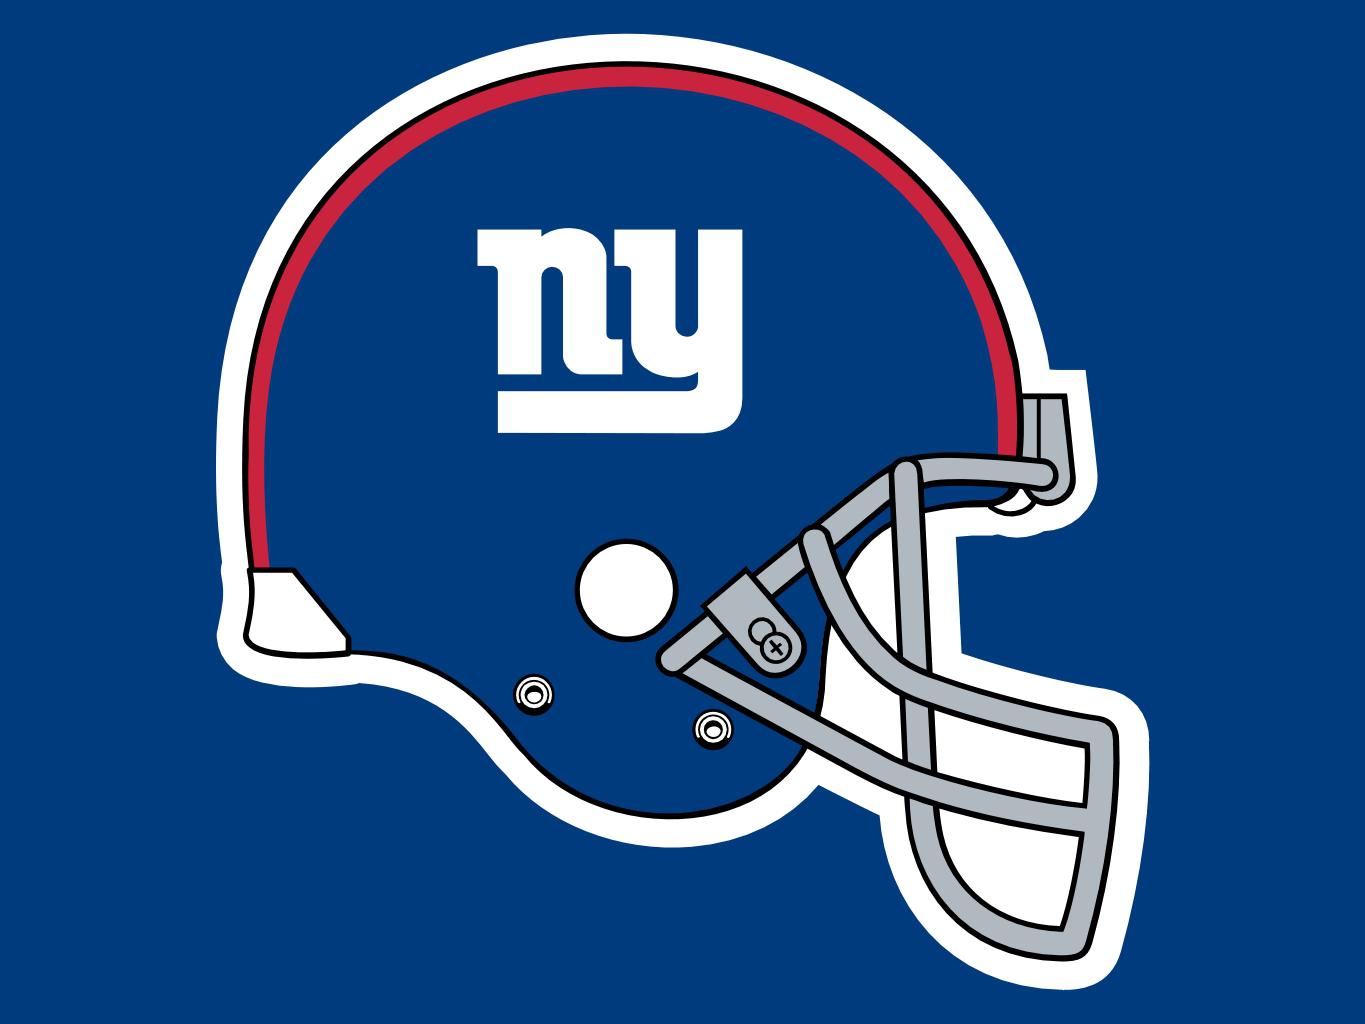 The new york giants - (#160191) - High Quality and Resolution ...